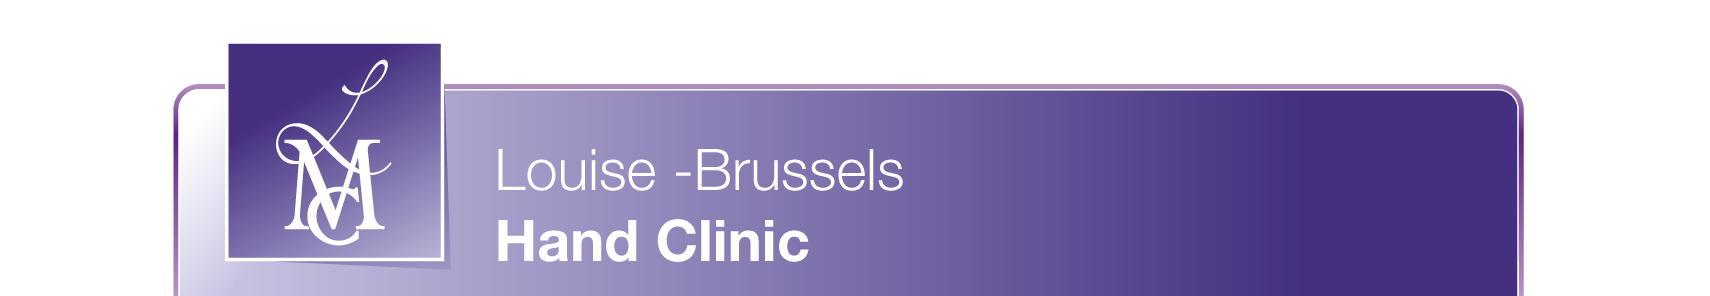 Louise Brussels - Hand Clinic